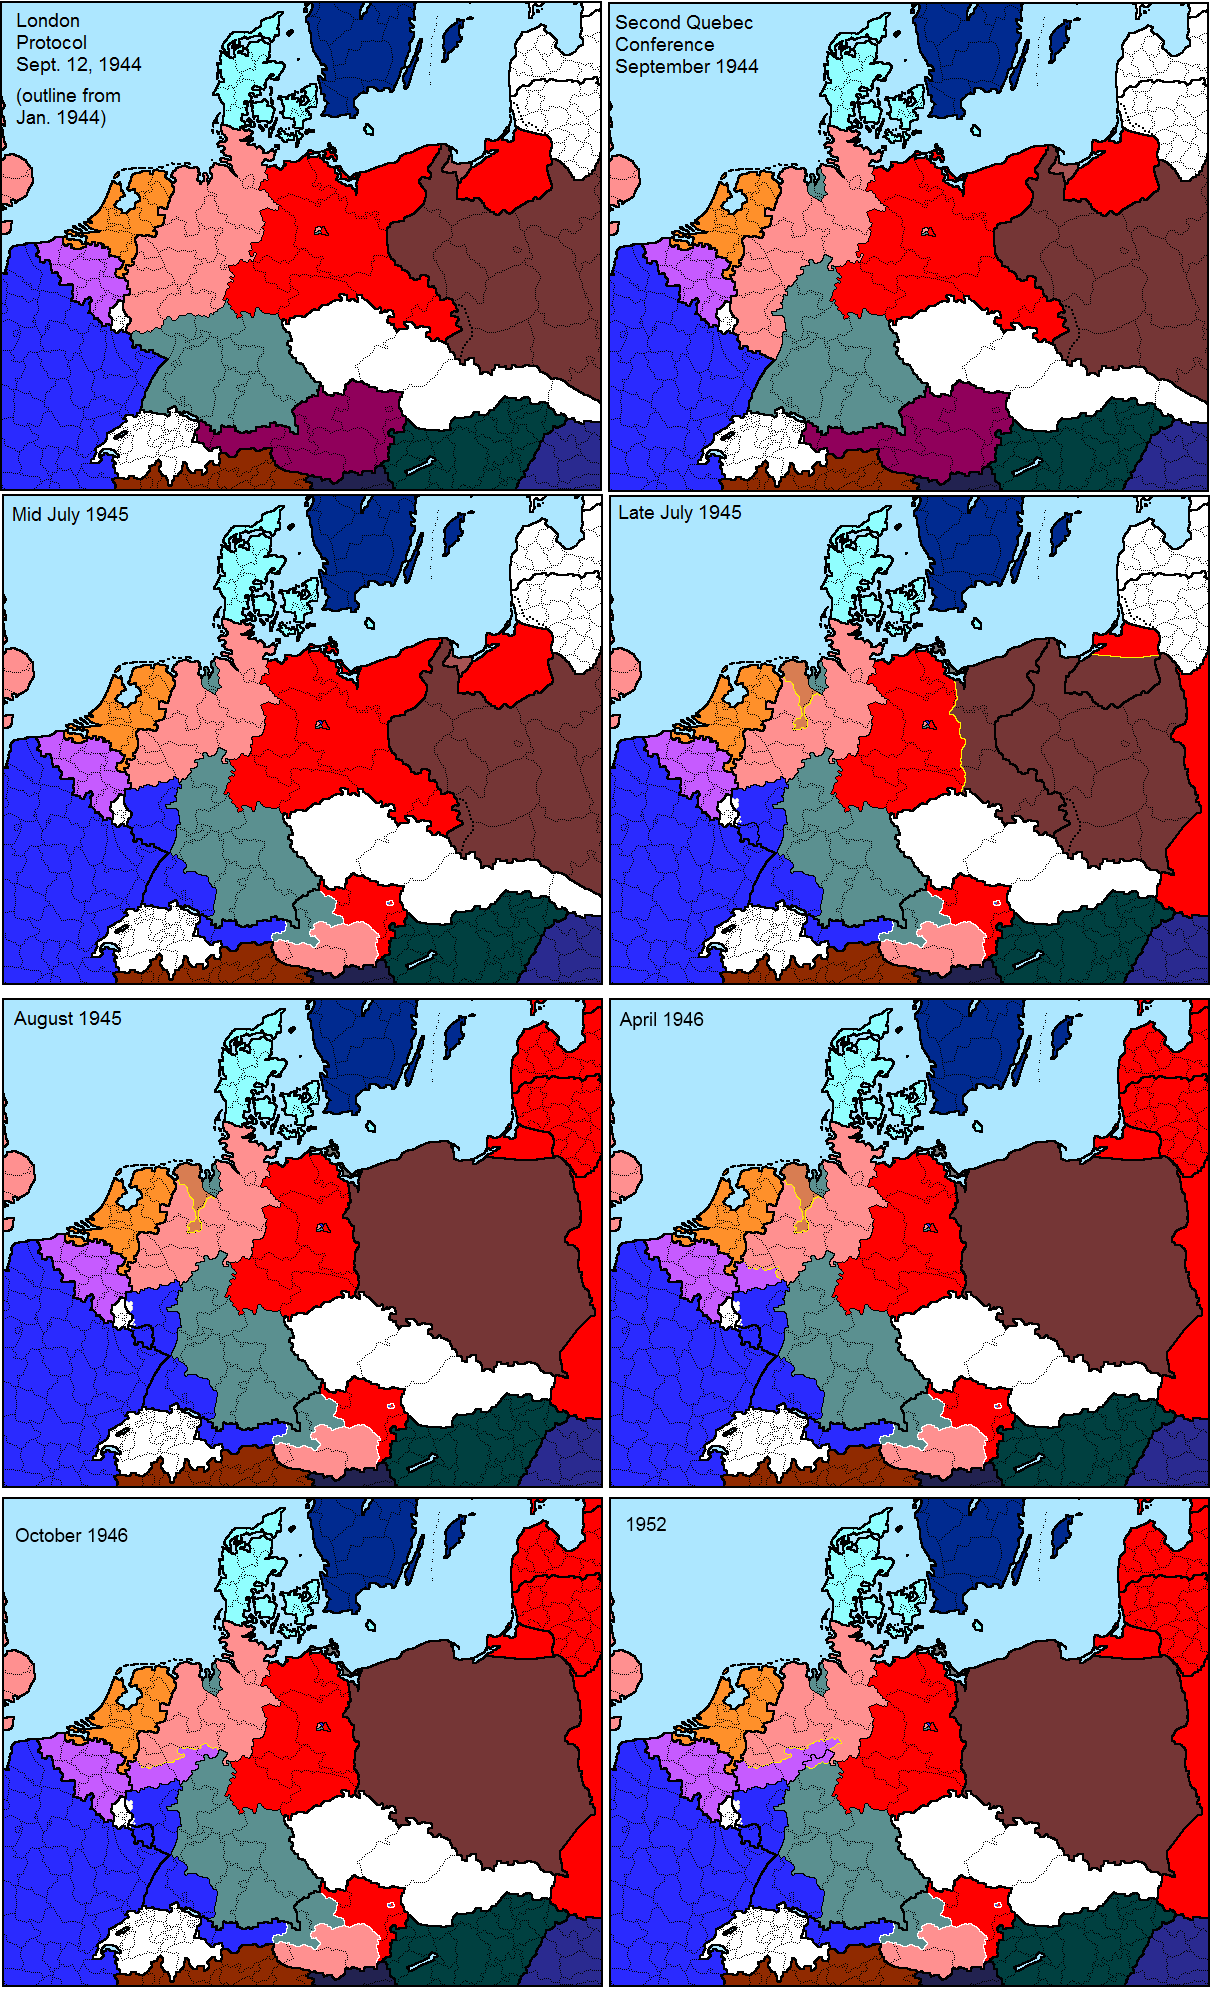 evolution of the occupation zones in germany 1943-1952.png